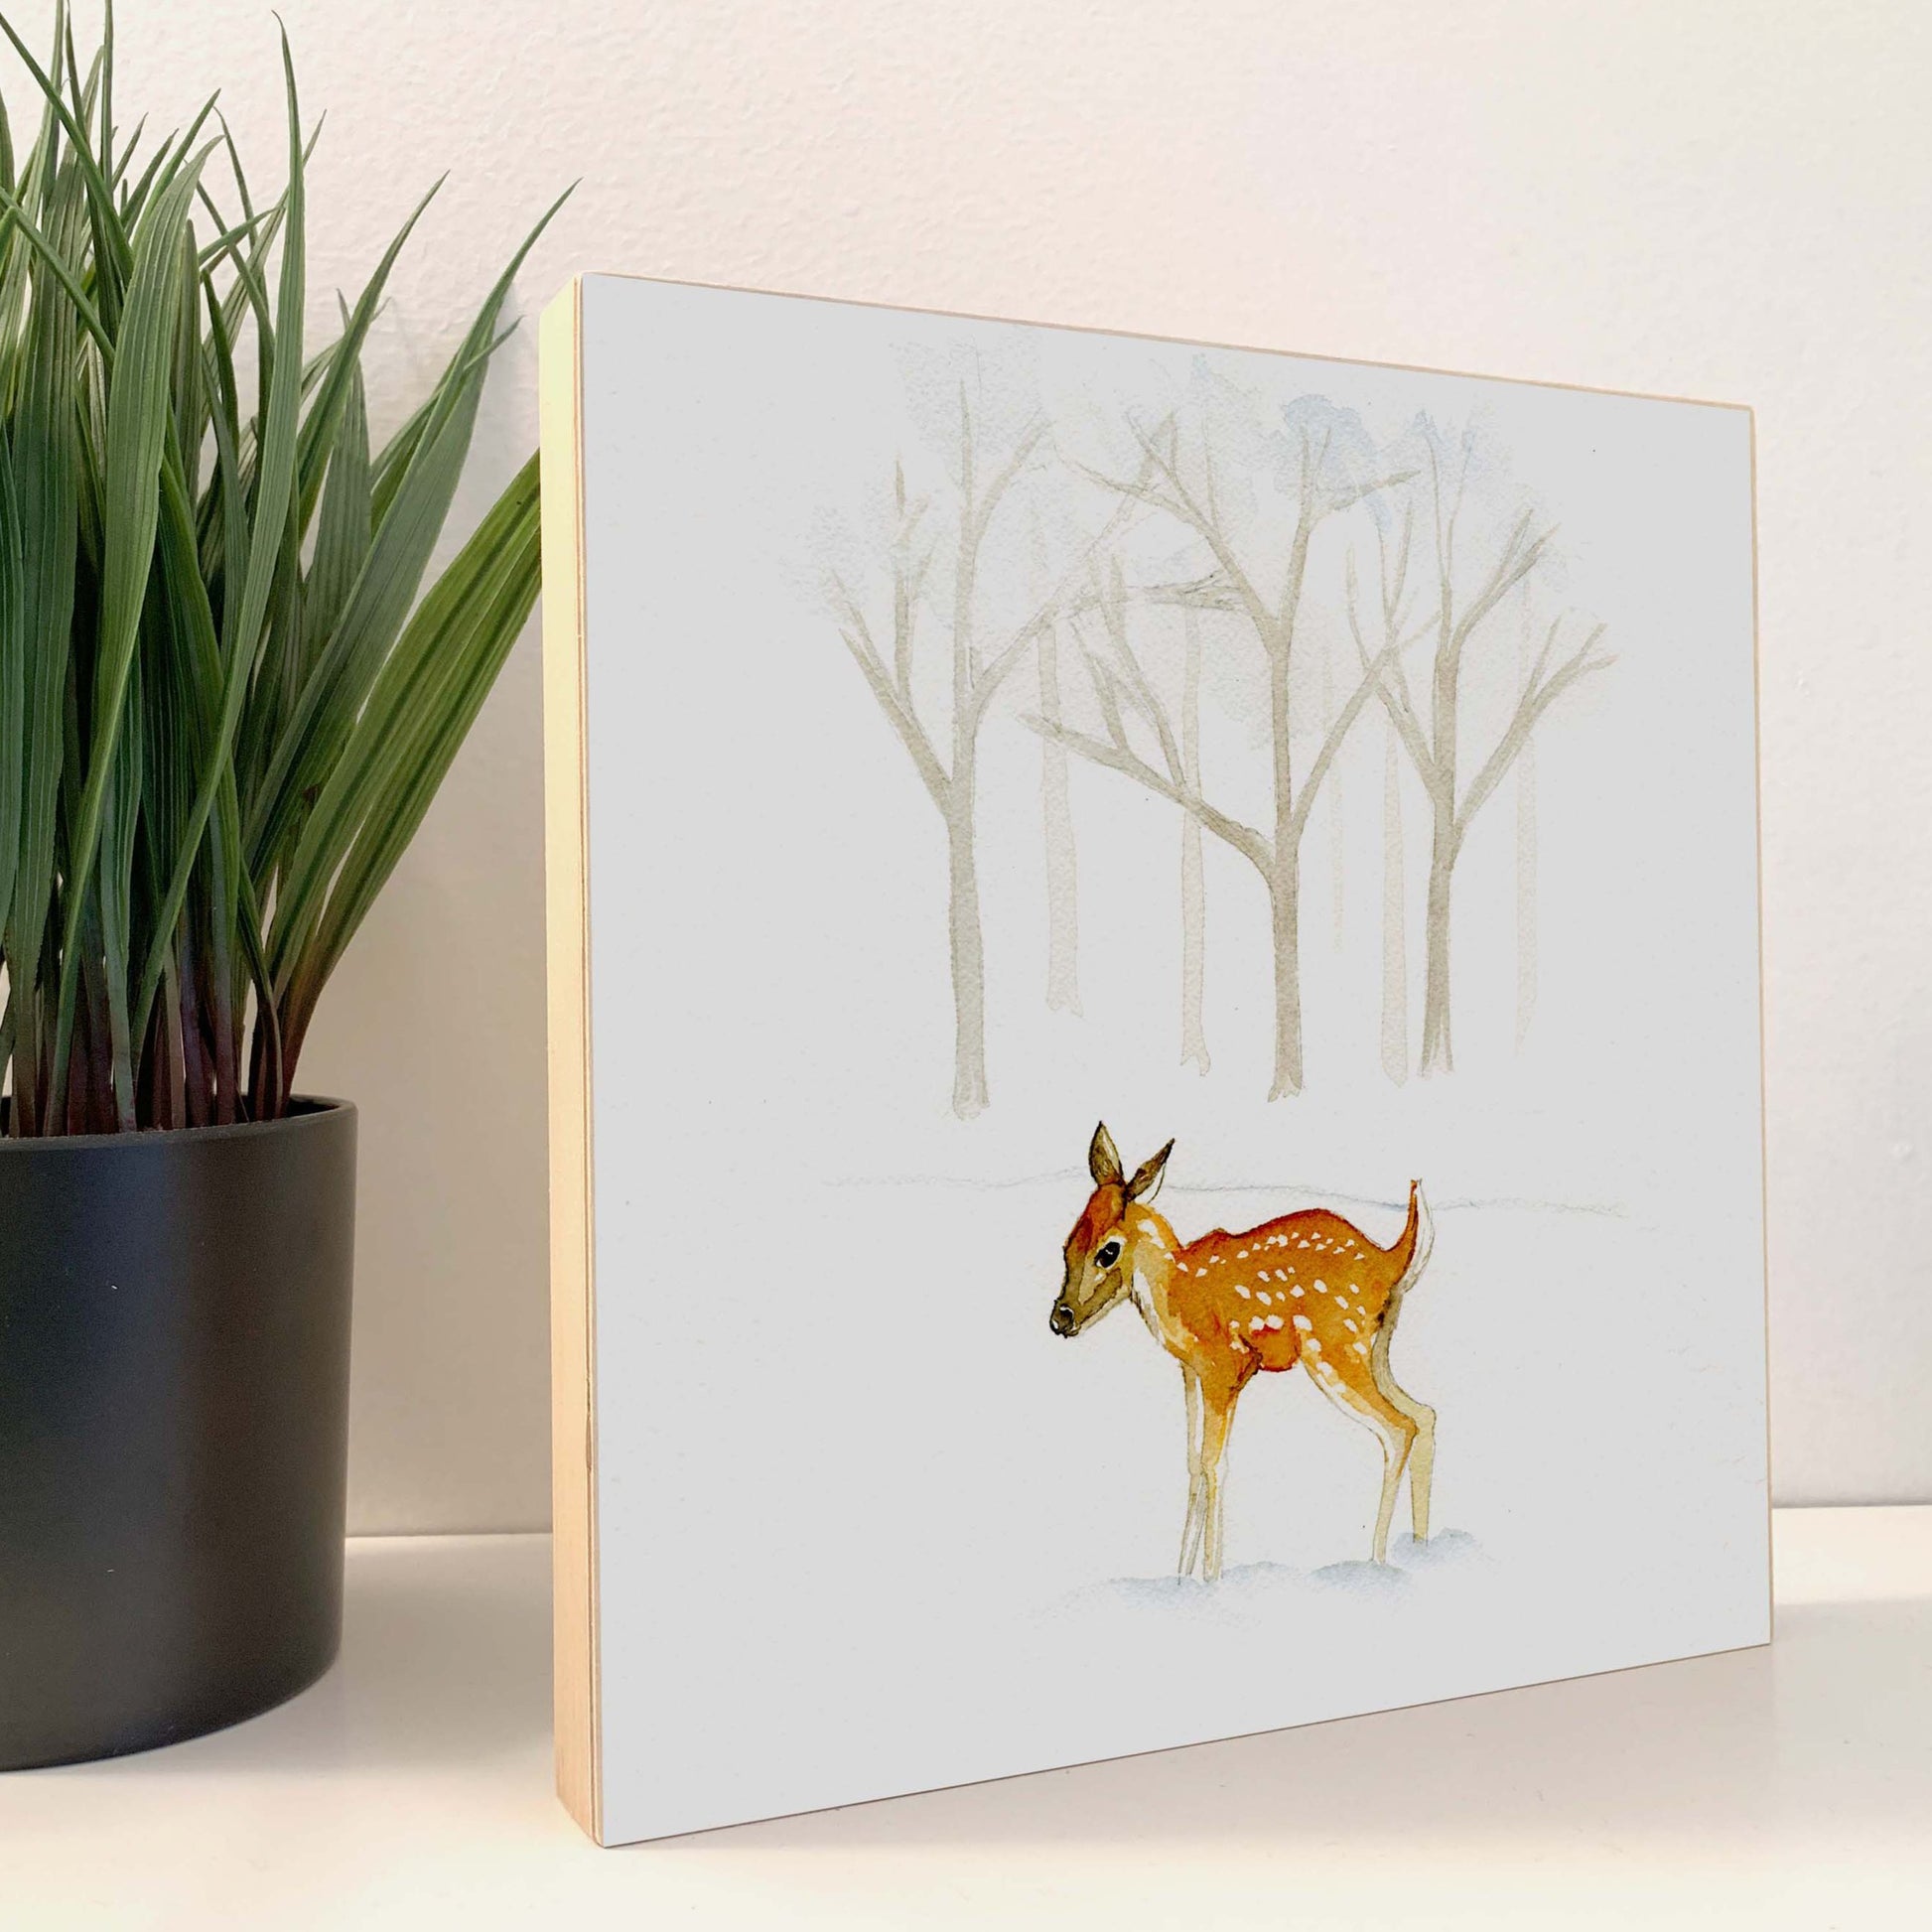 Woodland Deer in Snowy Woods Print on 5x5 or 8x8 Wood Block. Nursery, Christmas - Flamingo Shores - Original Art for Home Decor and Gifts